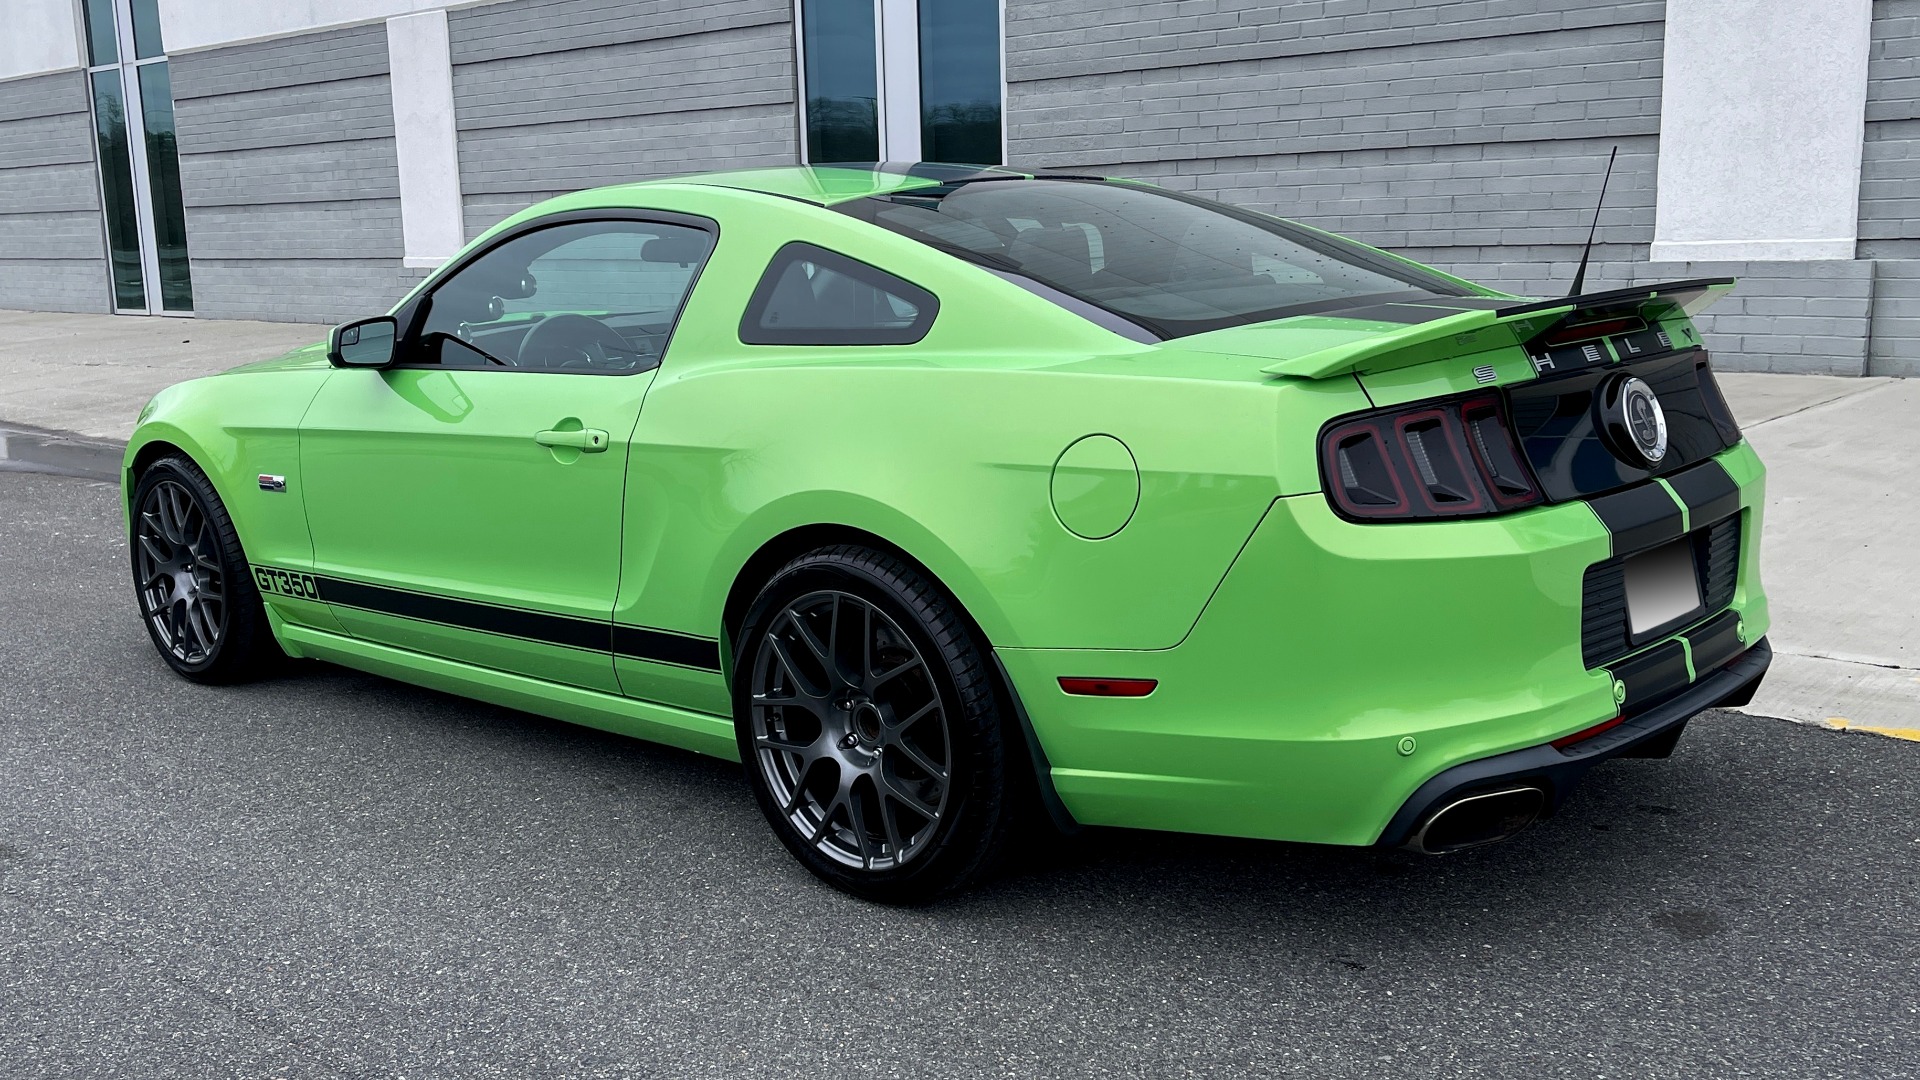 Used 2013 Ford MUSTANG GT COUPE / 5.0L / 6-SPD AUTO / SHELBY GT350 PKG 624HP / TRACK PREP for sale $52,999 at Formula Imports in Charlotte NC 28227 4